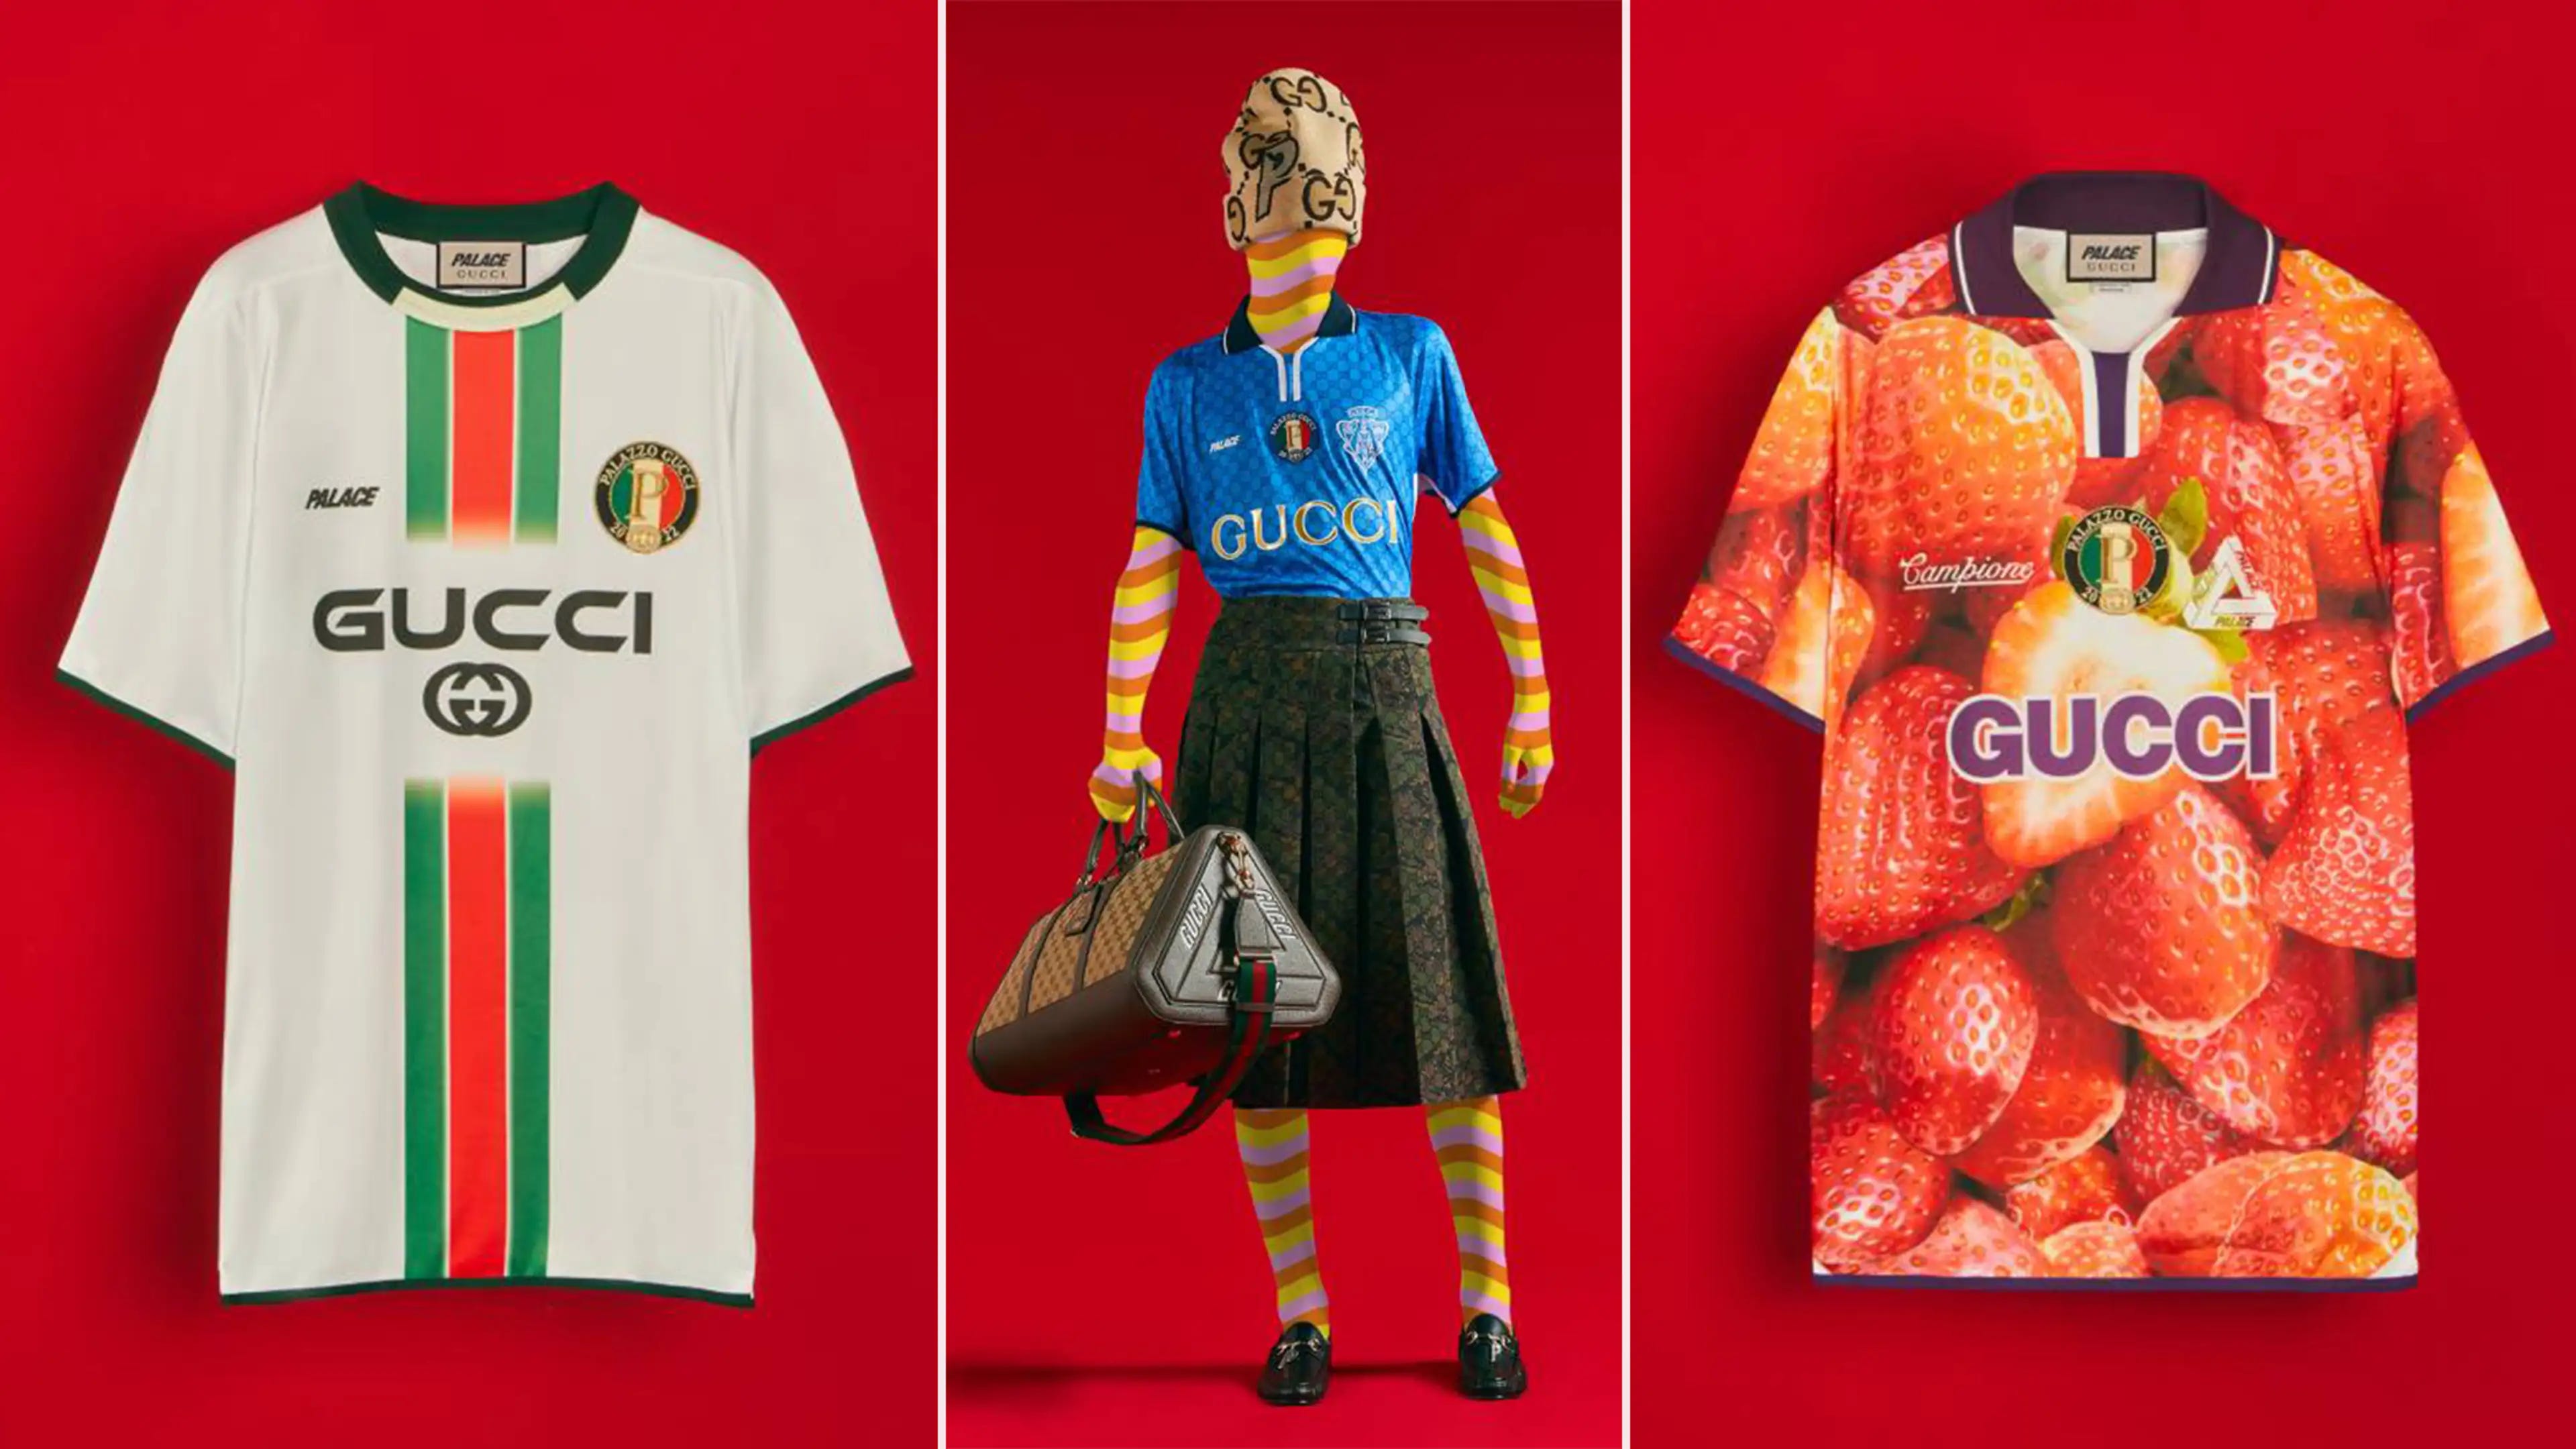 Football as Fashion Has Only Just Begun